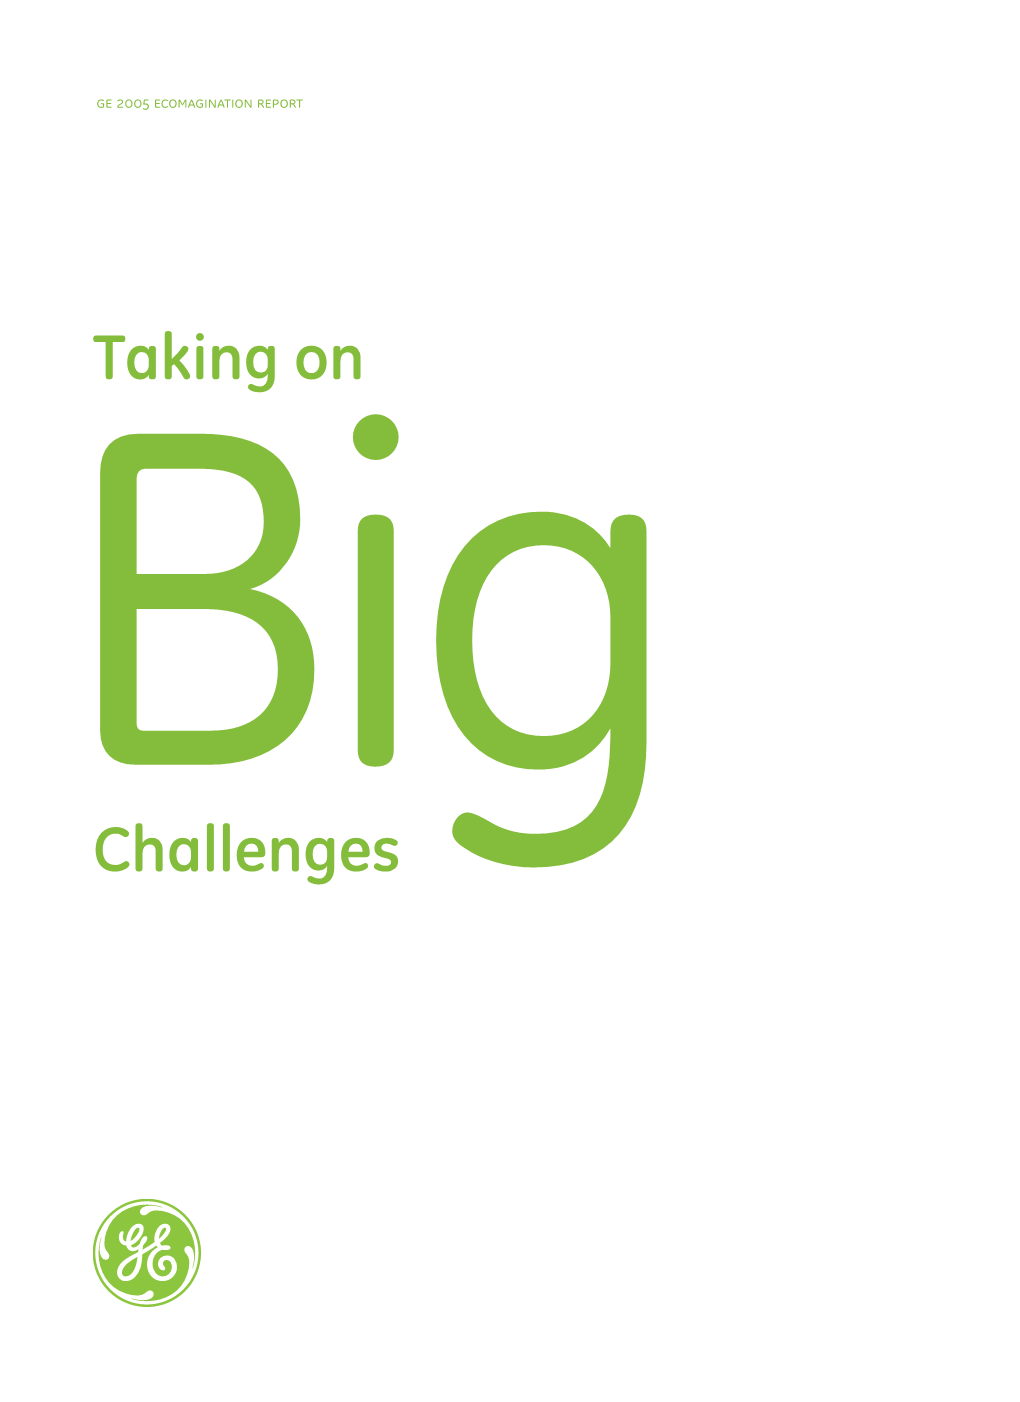 GE 2005 Ecomagination Report: Taking on Big Challenges